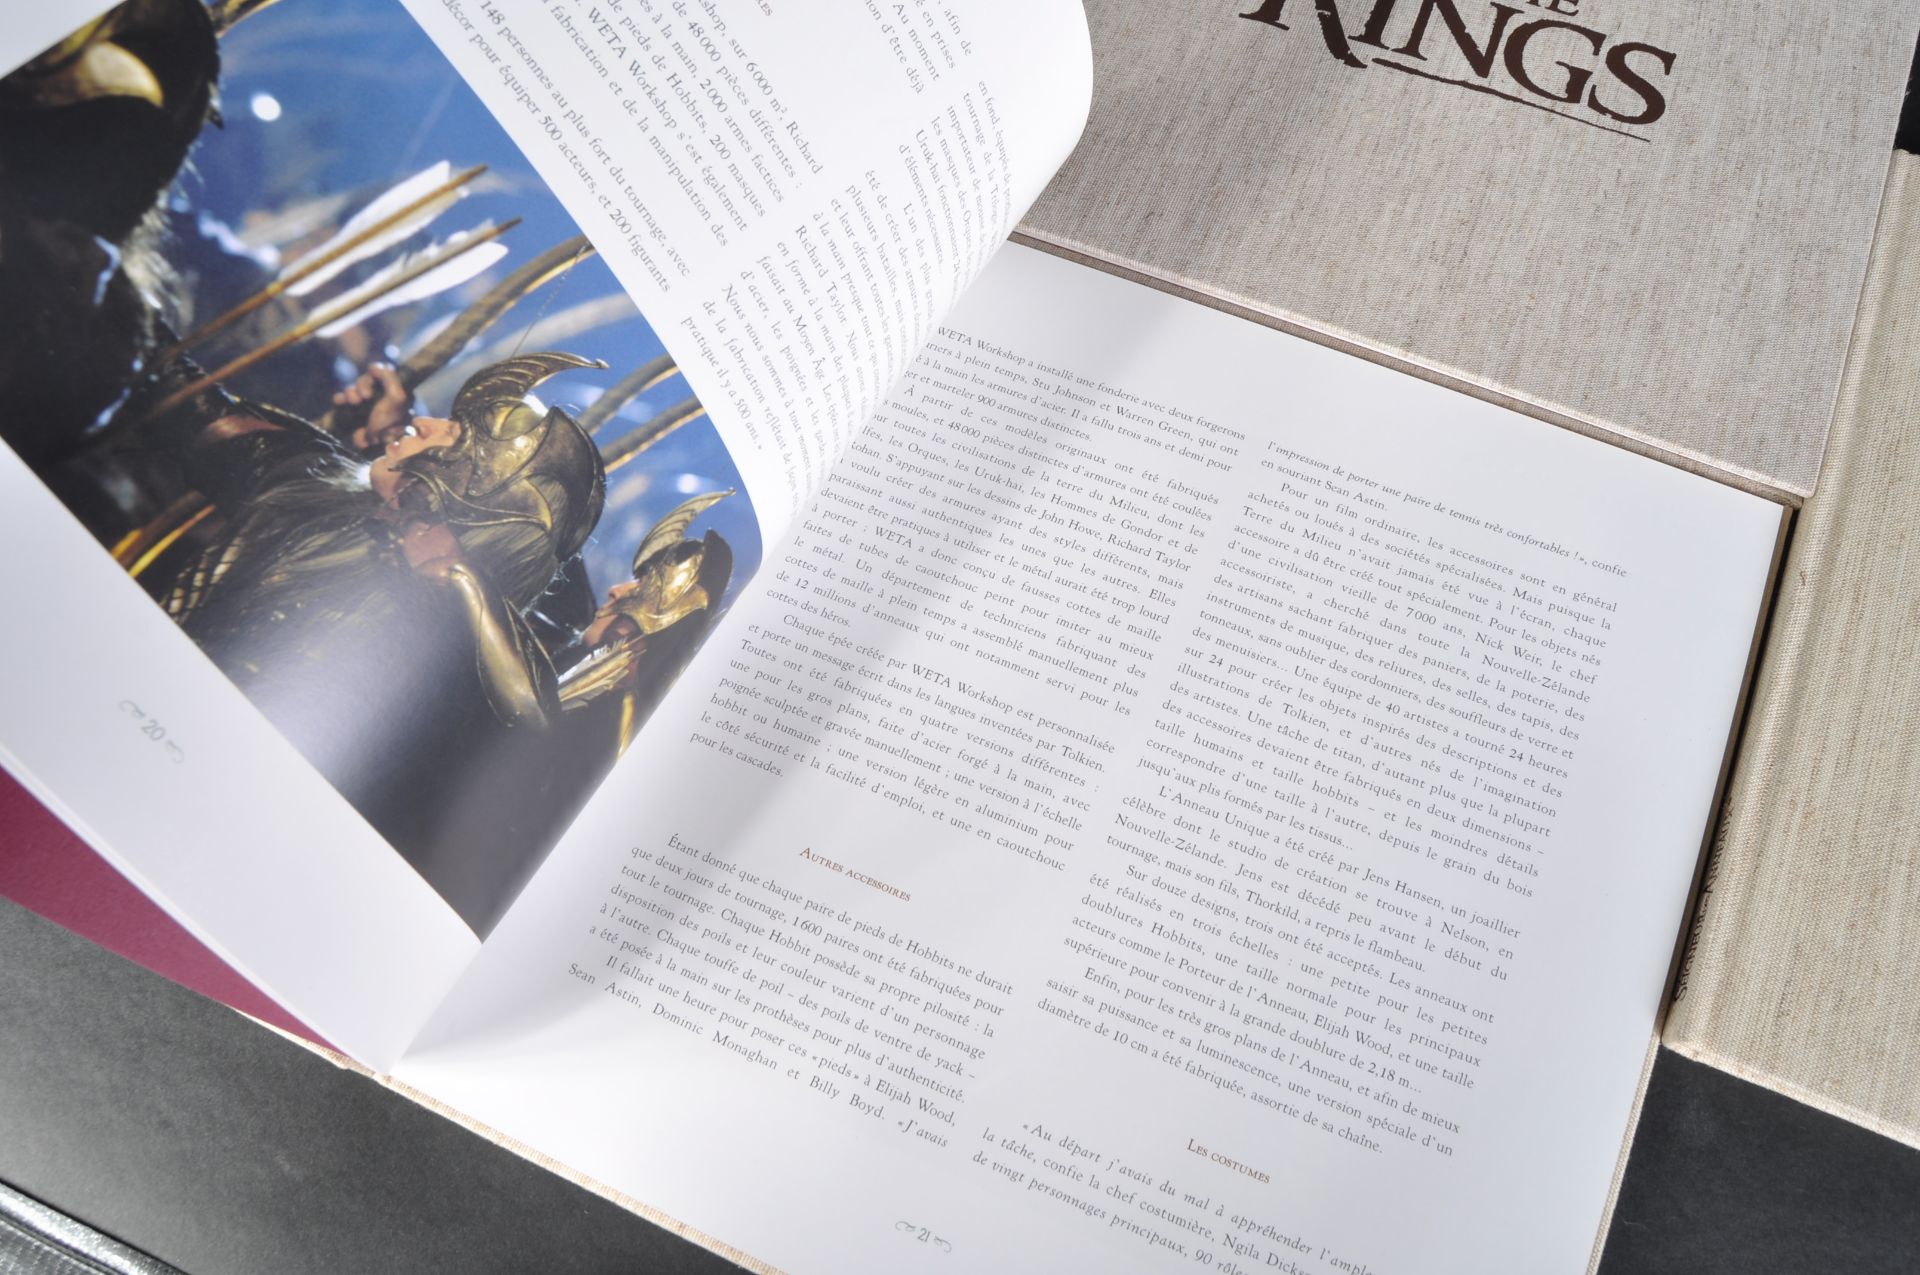 LORD OF THE RINGS - PRESS RELEASE BOOKS OF FRANCHISE - Image 2 of 7